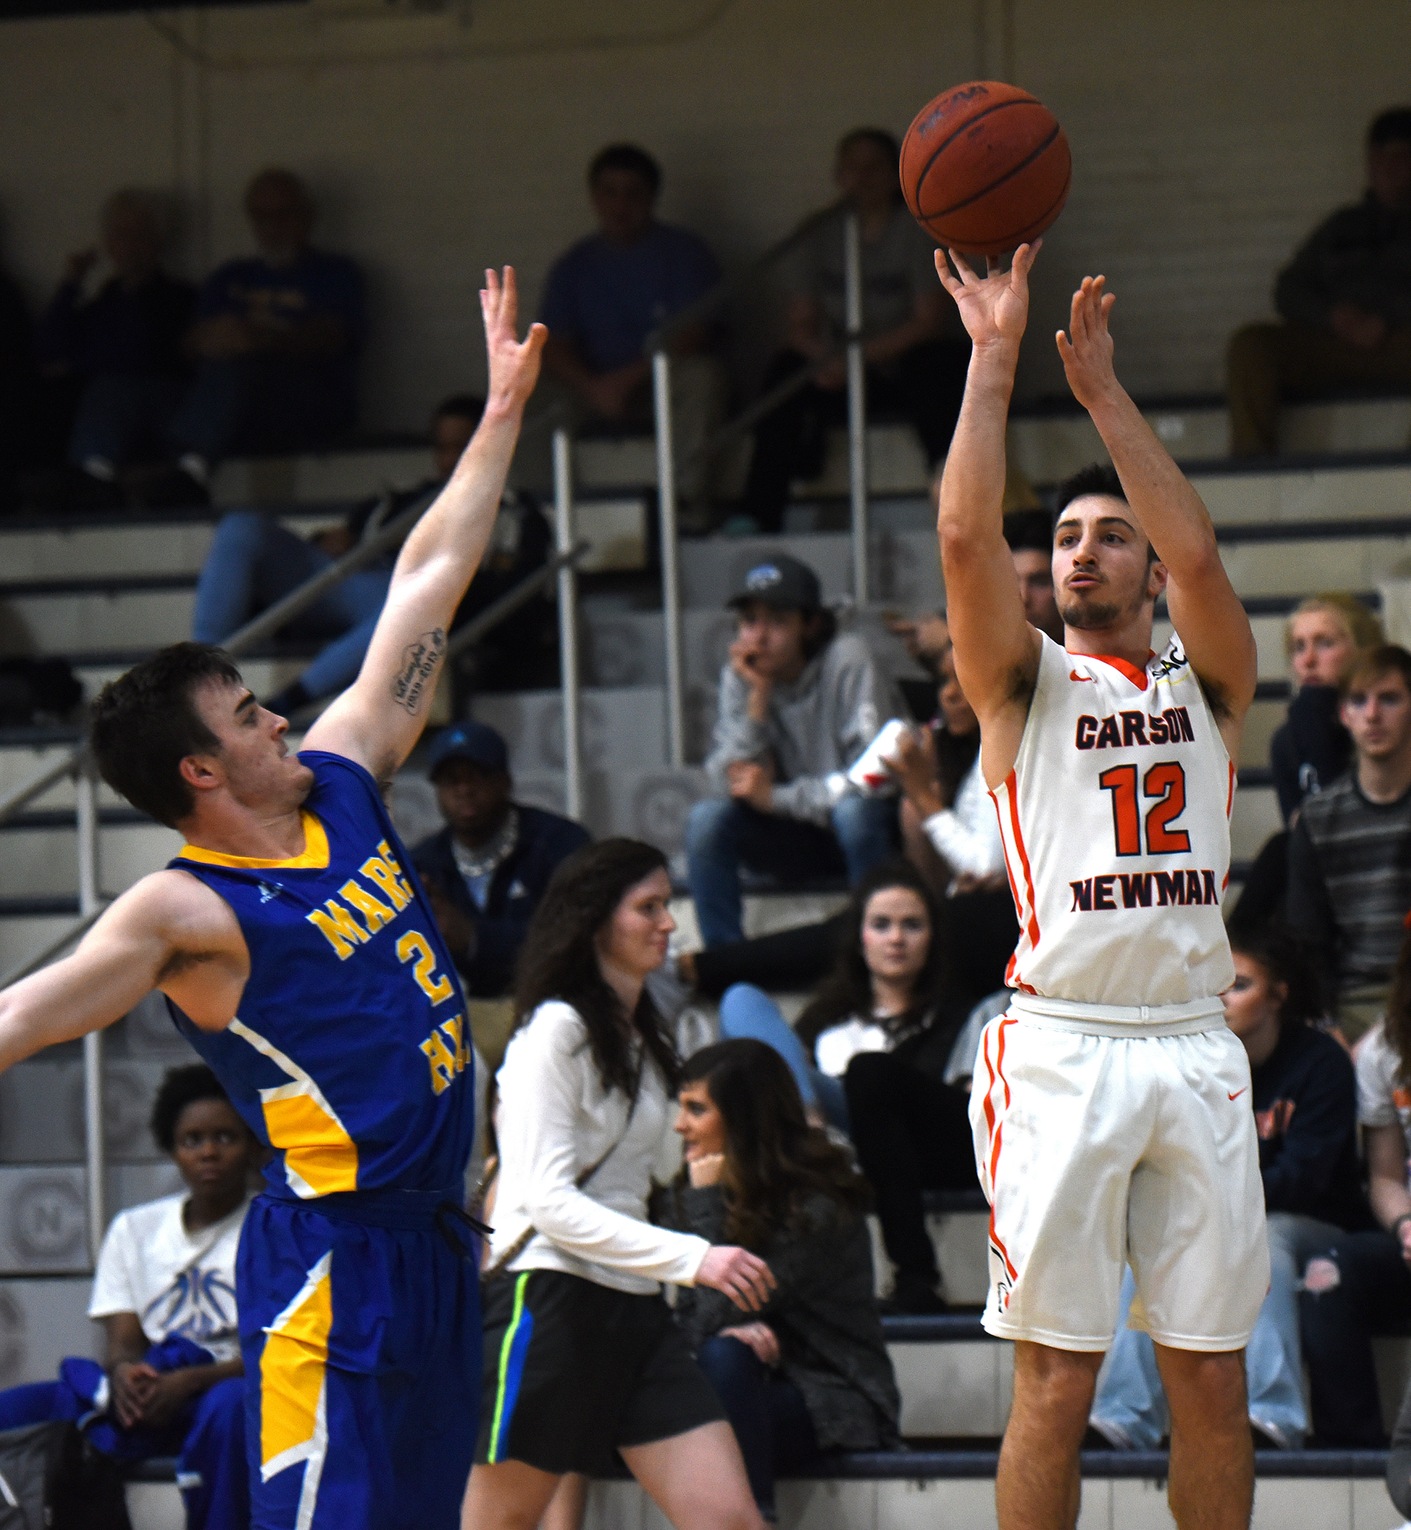 Pangallo’s three-point pop powers potent Eagles past Mars Hill